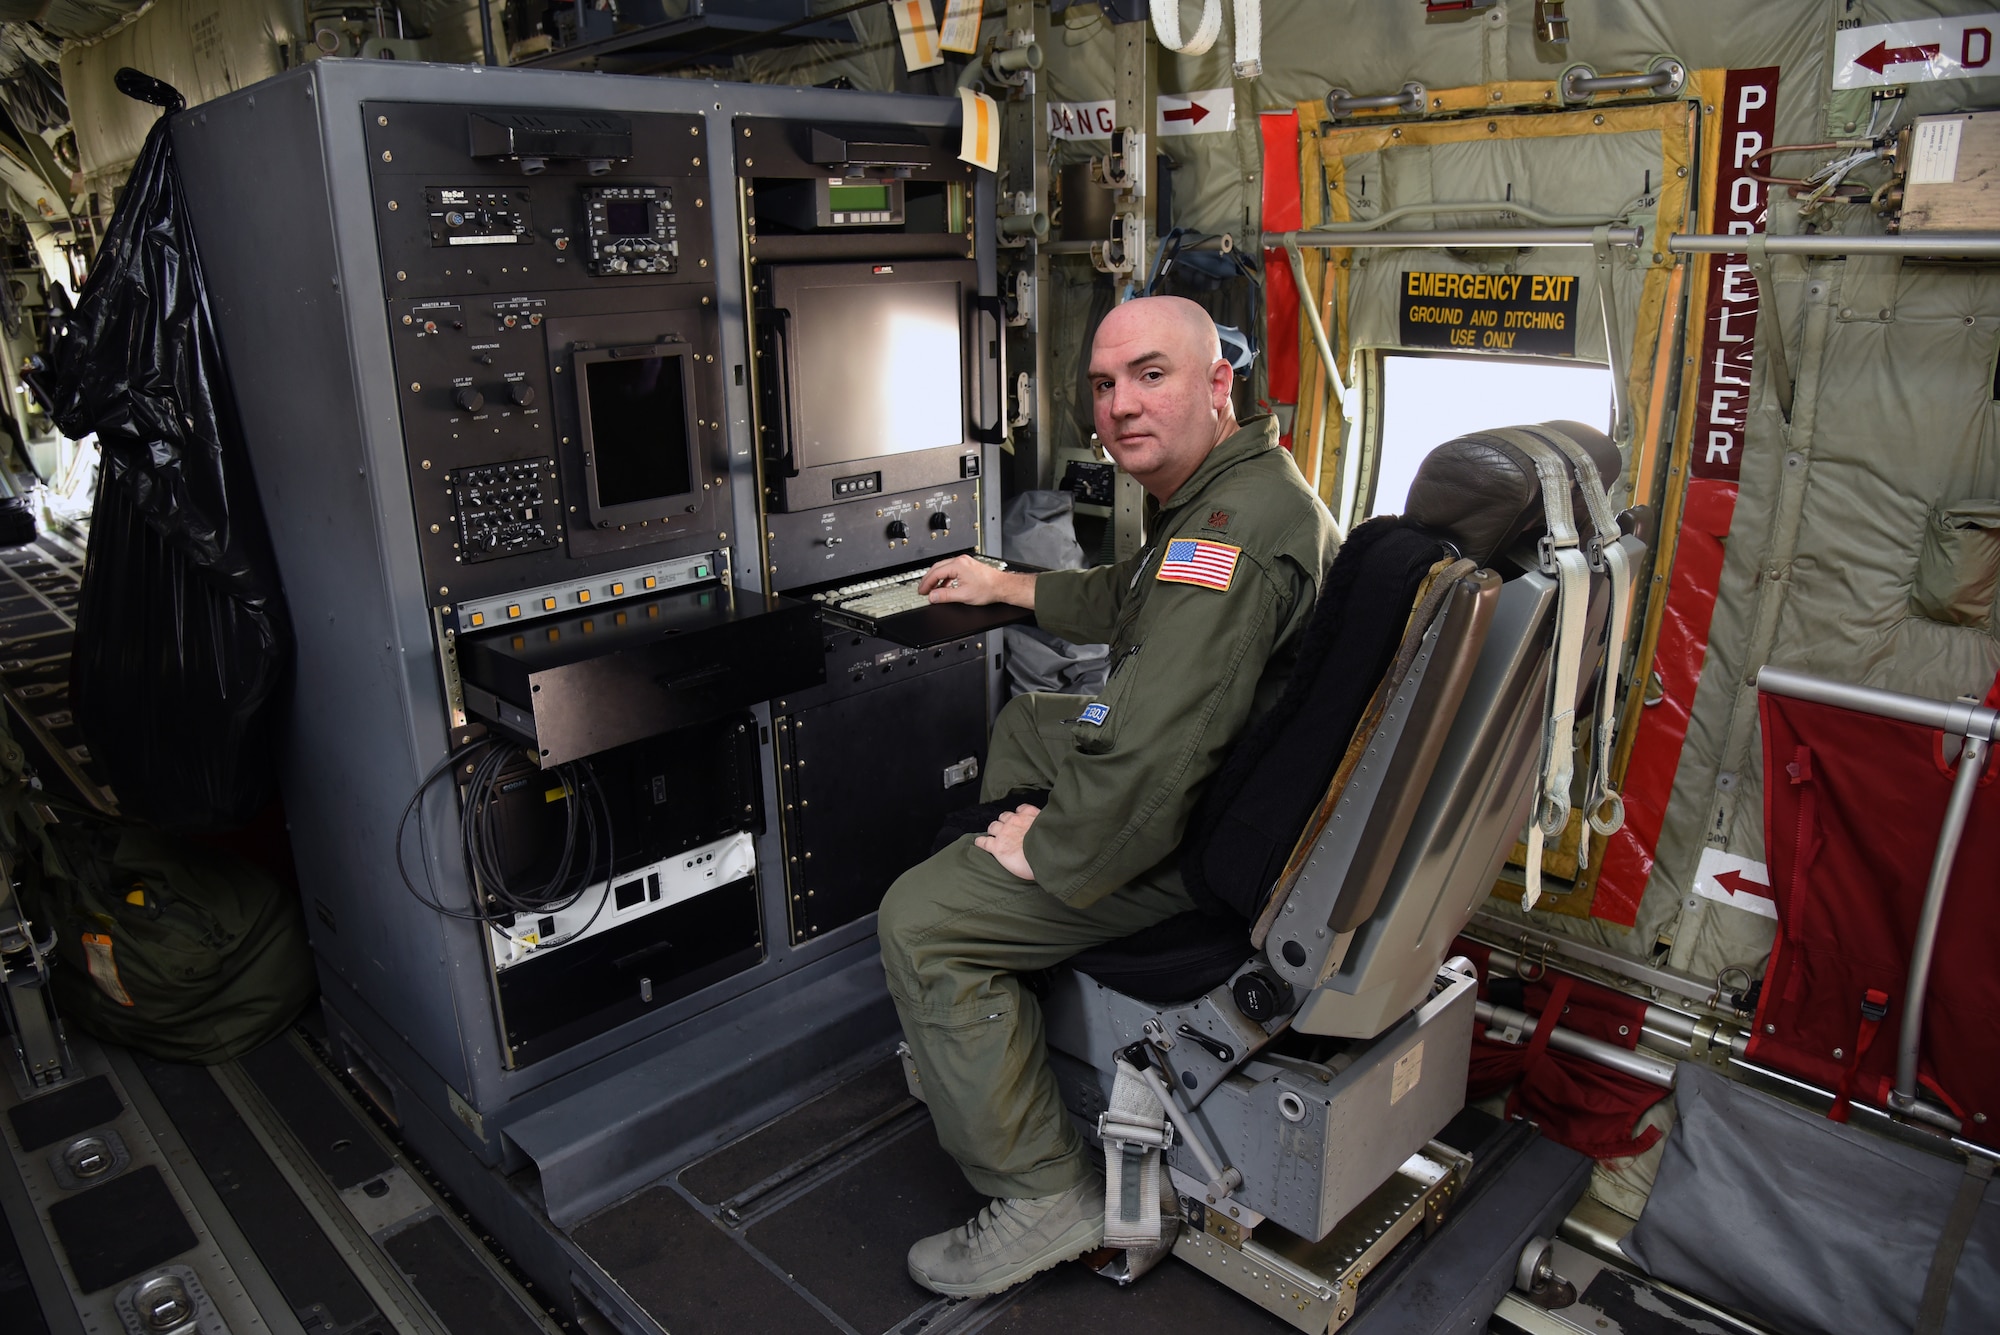 Maj. Tobi Baker, 53rd Weather Reconnaissance Squadron aerial weather reconnaissance officer, poses for a photo at the ARWO station inside of a WC-130J Super Hercules at Keesler Air Force Base, Mississippi, May 23, 2019. The ARWO acts like a flight director in a storm. He continuously monitors atmospheric data collected from the aircraft’s sensors throughout the mission. The gathered data is checked for accuracy and the information is used to guide the aircraft into the center of the storm. (U.S. Air Force photo by Tech. Sgt. Christopher Carranza)